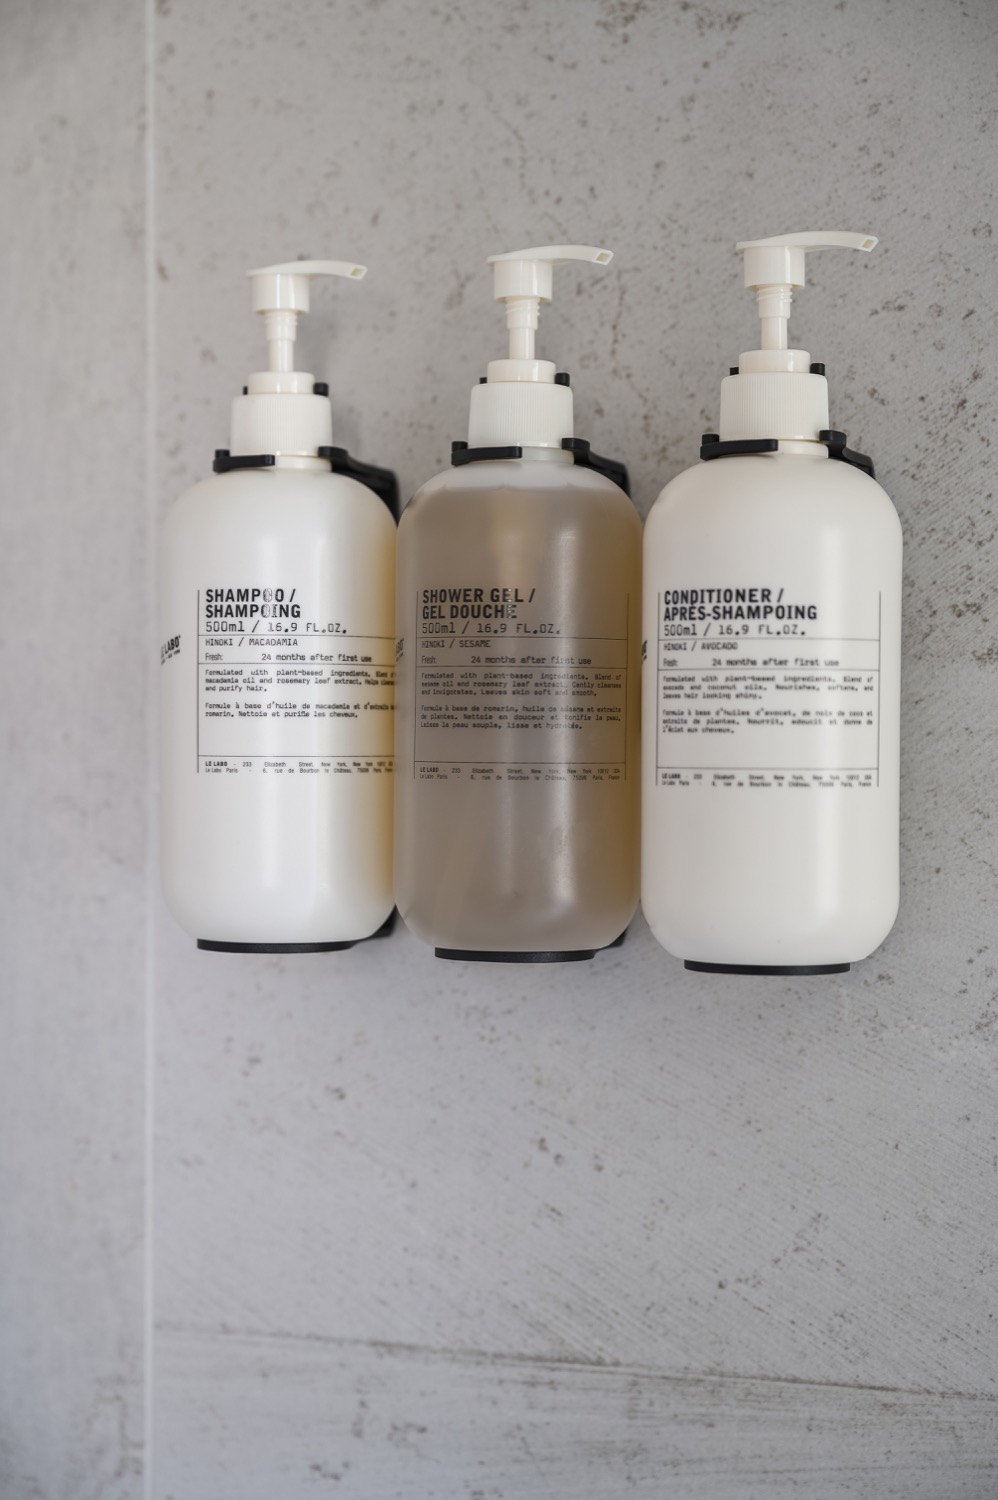 Feel good, Smell great with sensorial personal care products, by Le Labo.